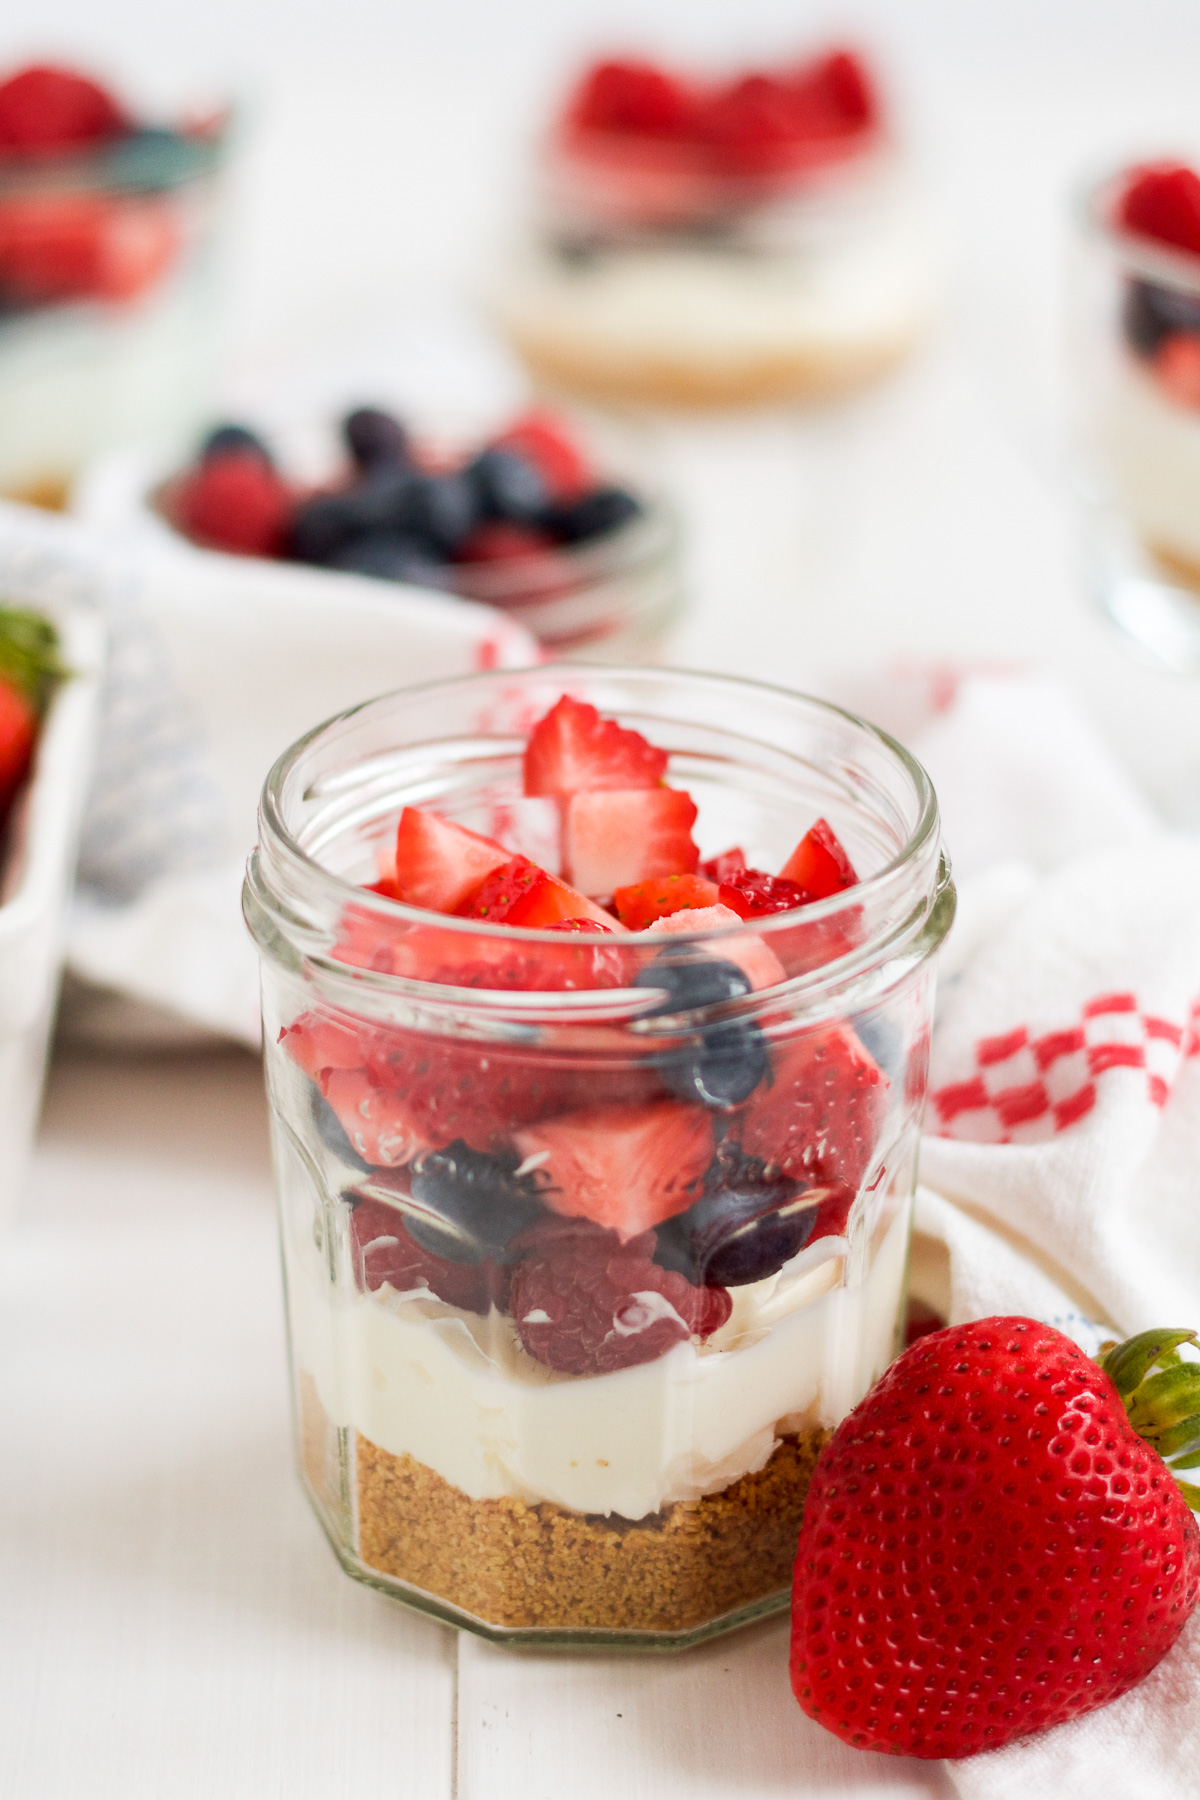 These easy no-bake cheesecakes can be topped with fresh berries in the summer, or silky lemon curd in the winter!